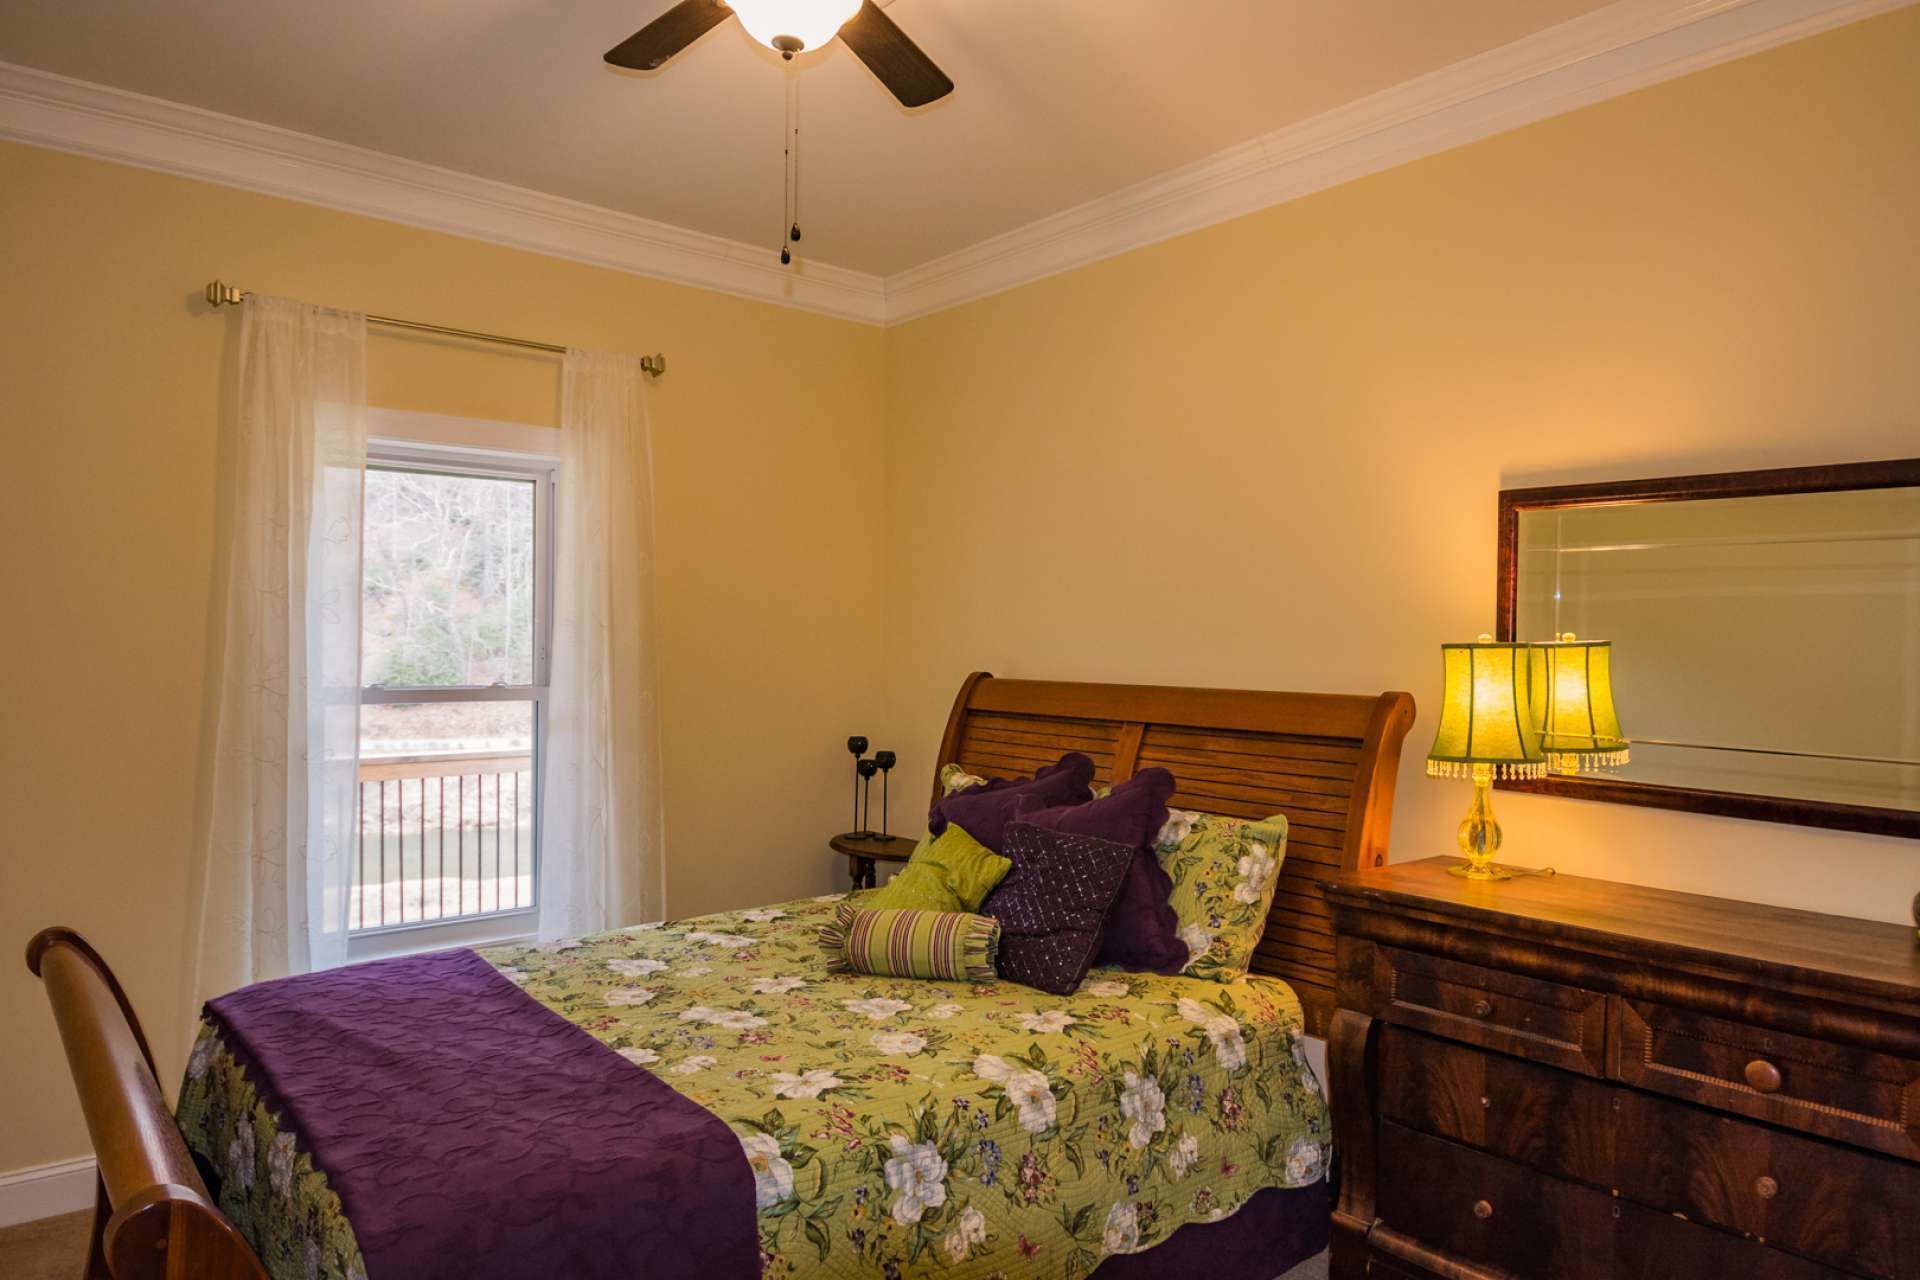 The lower level bedrooms are roomy and will be sure to please your overnight guests.